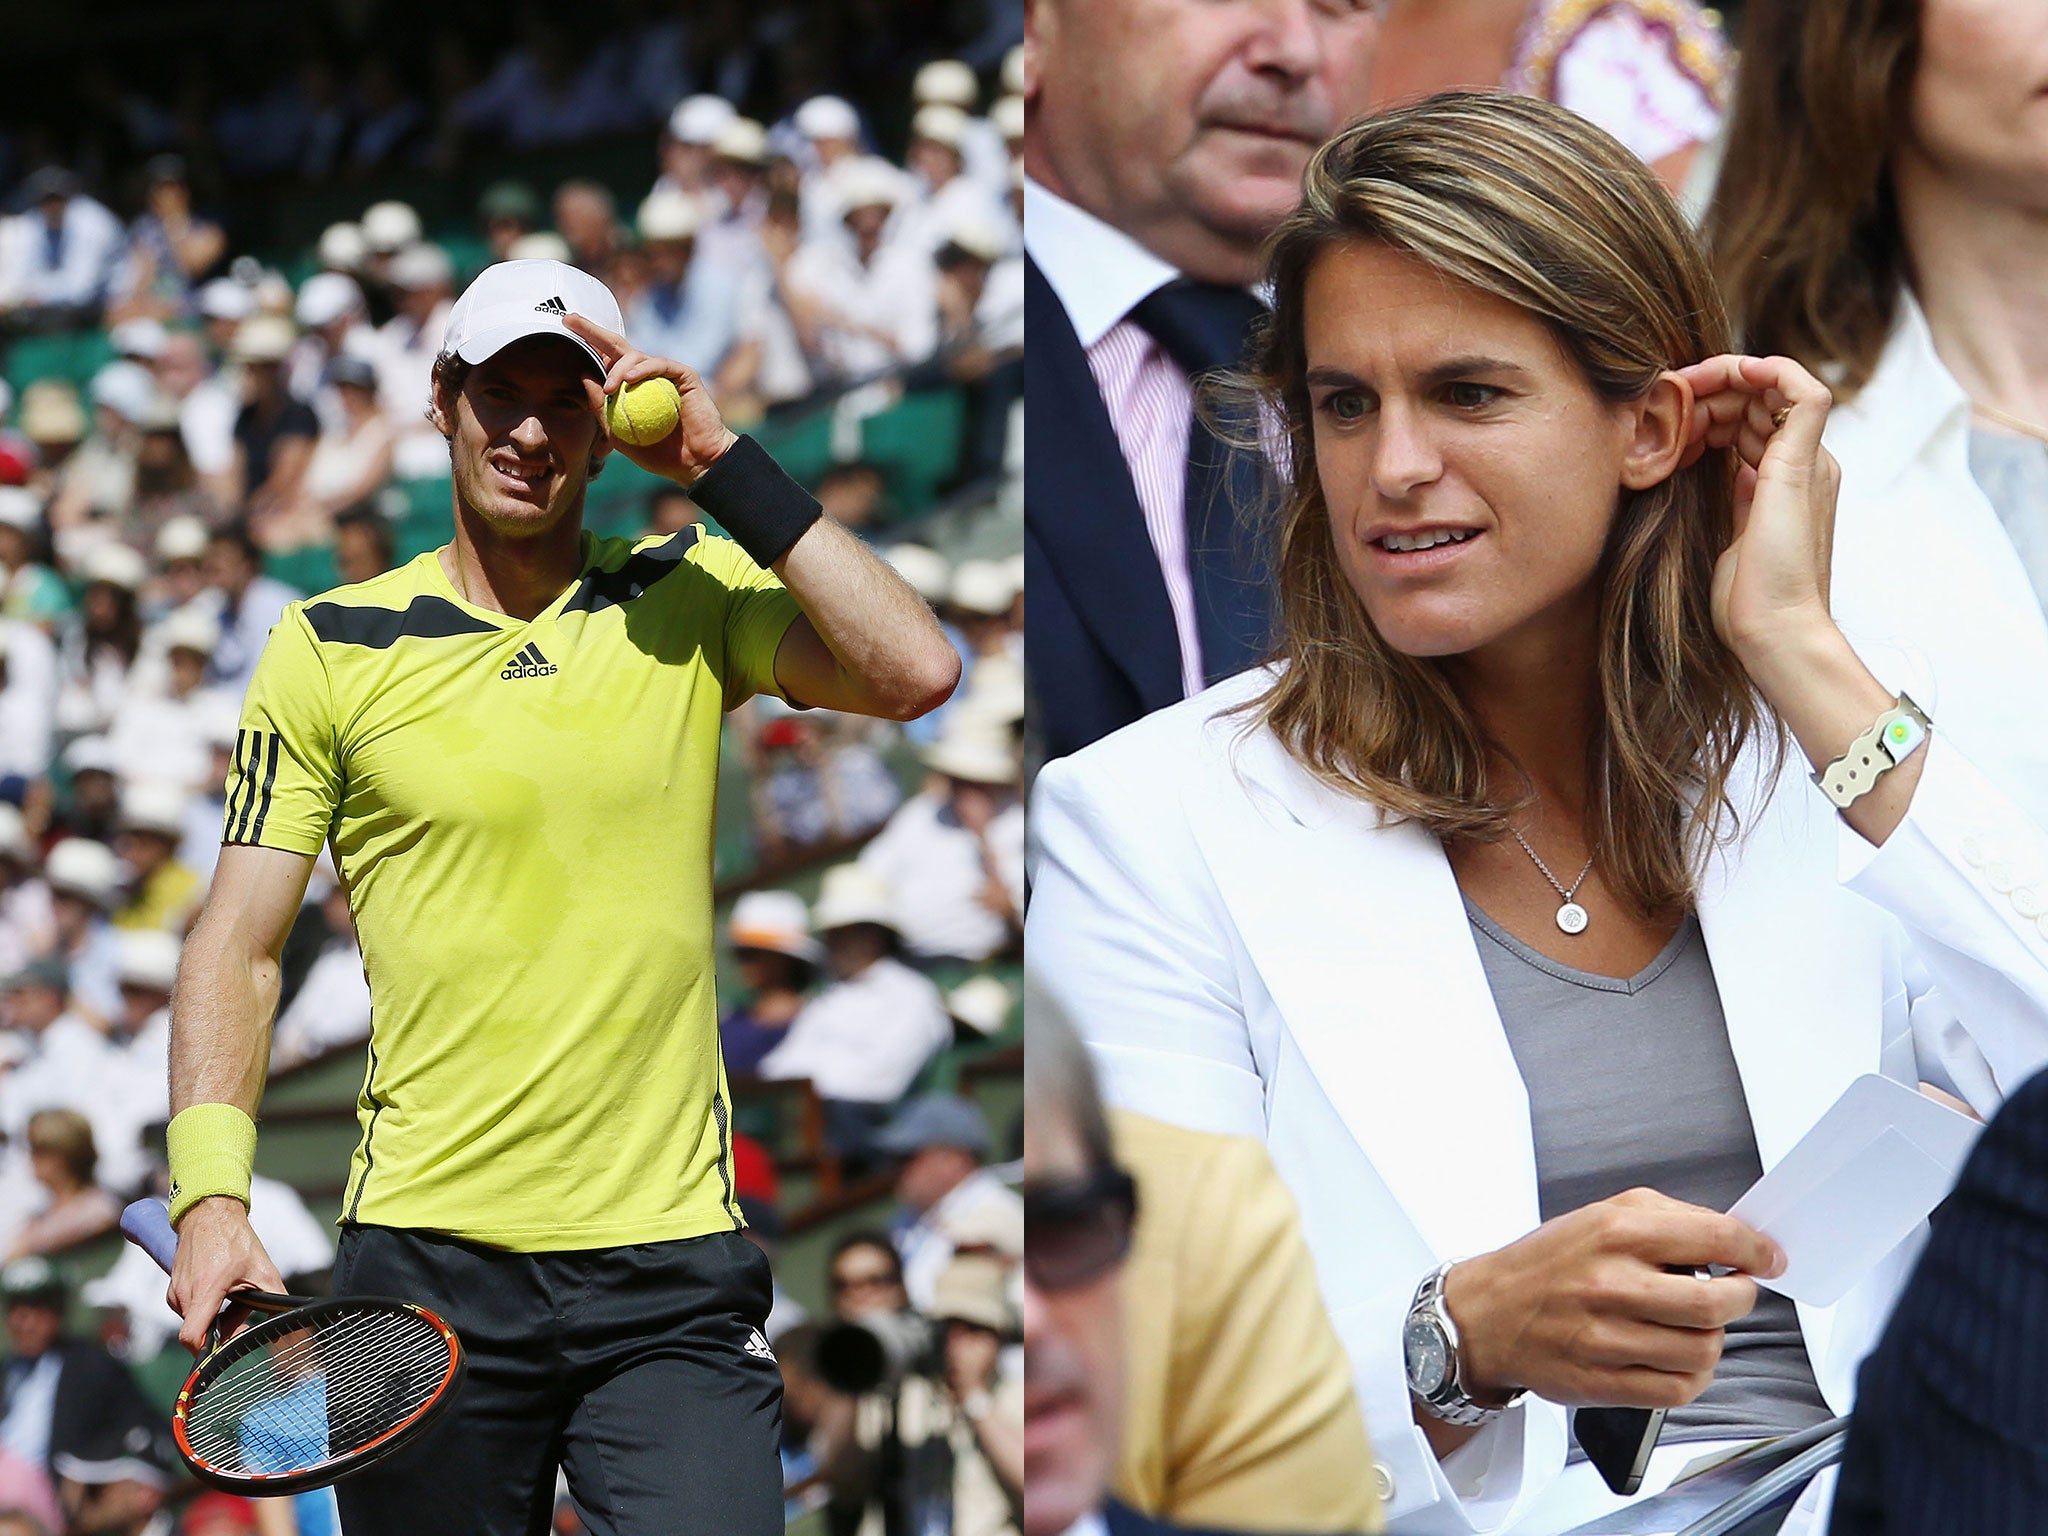 Andy Murray has confirmed Amelie Mauresmo as his new coach